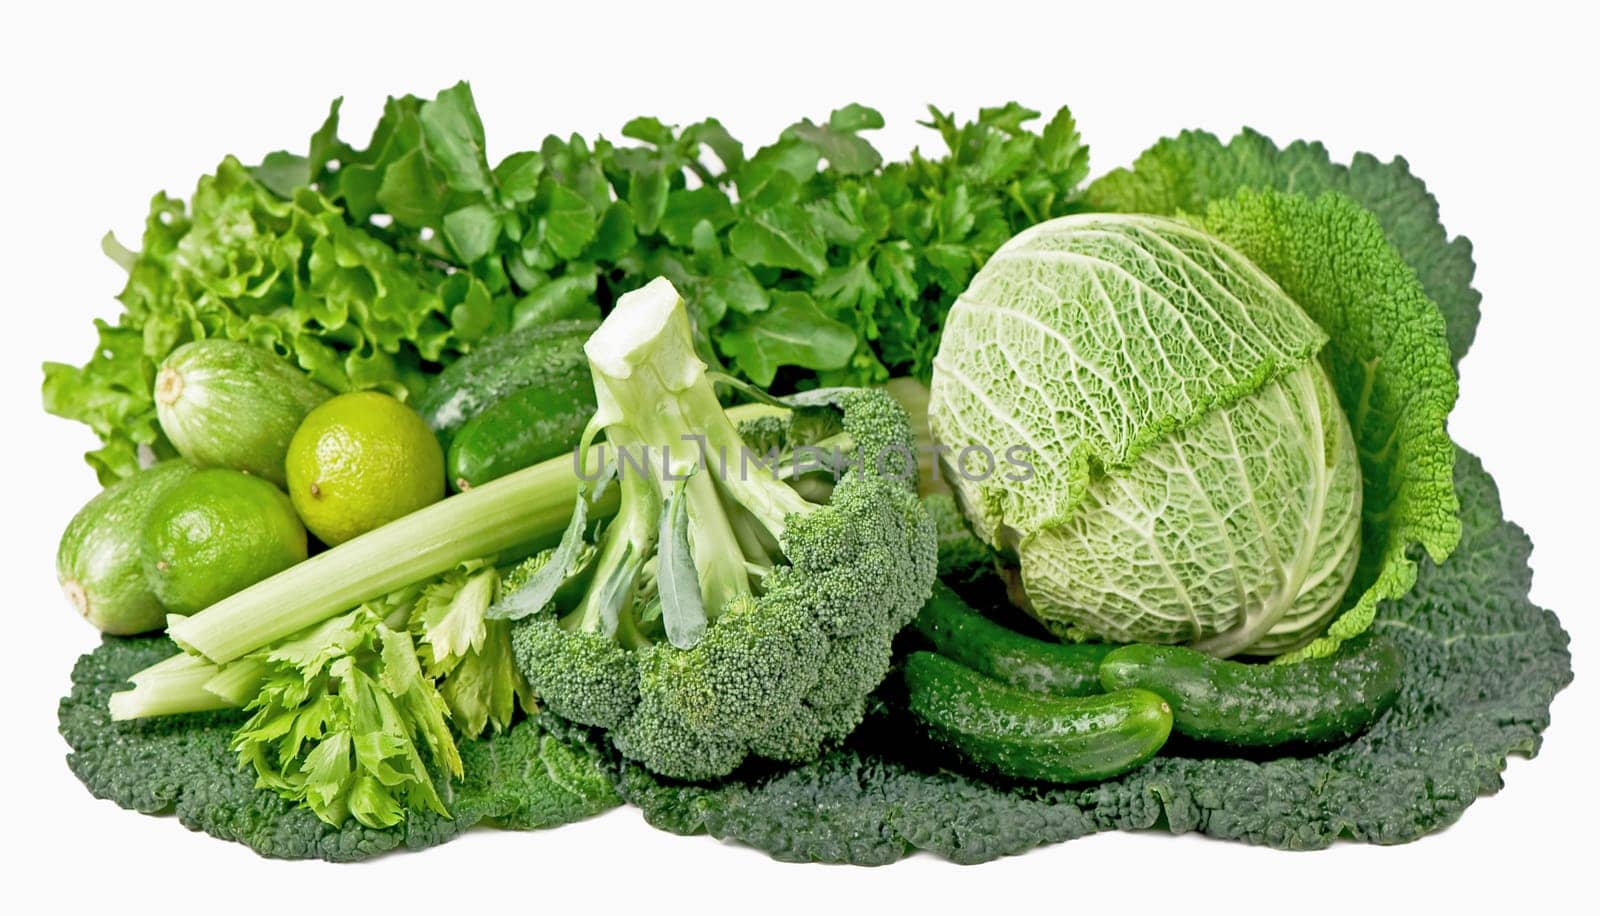 Top view healthy food clean eating vegetables, seeds, superfoods, leafy vegetables. Healthy Green Organic Raw Broccoli Flowers Ready for Cooking. Composition with fresh vegetables of broccoli on a white background.